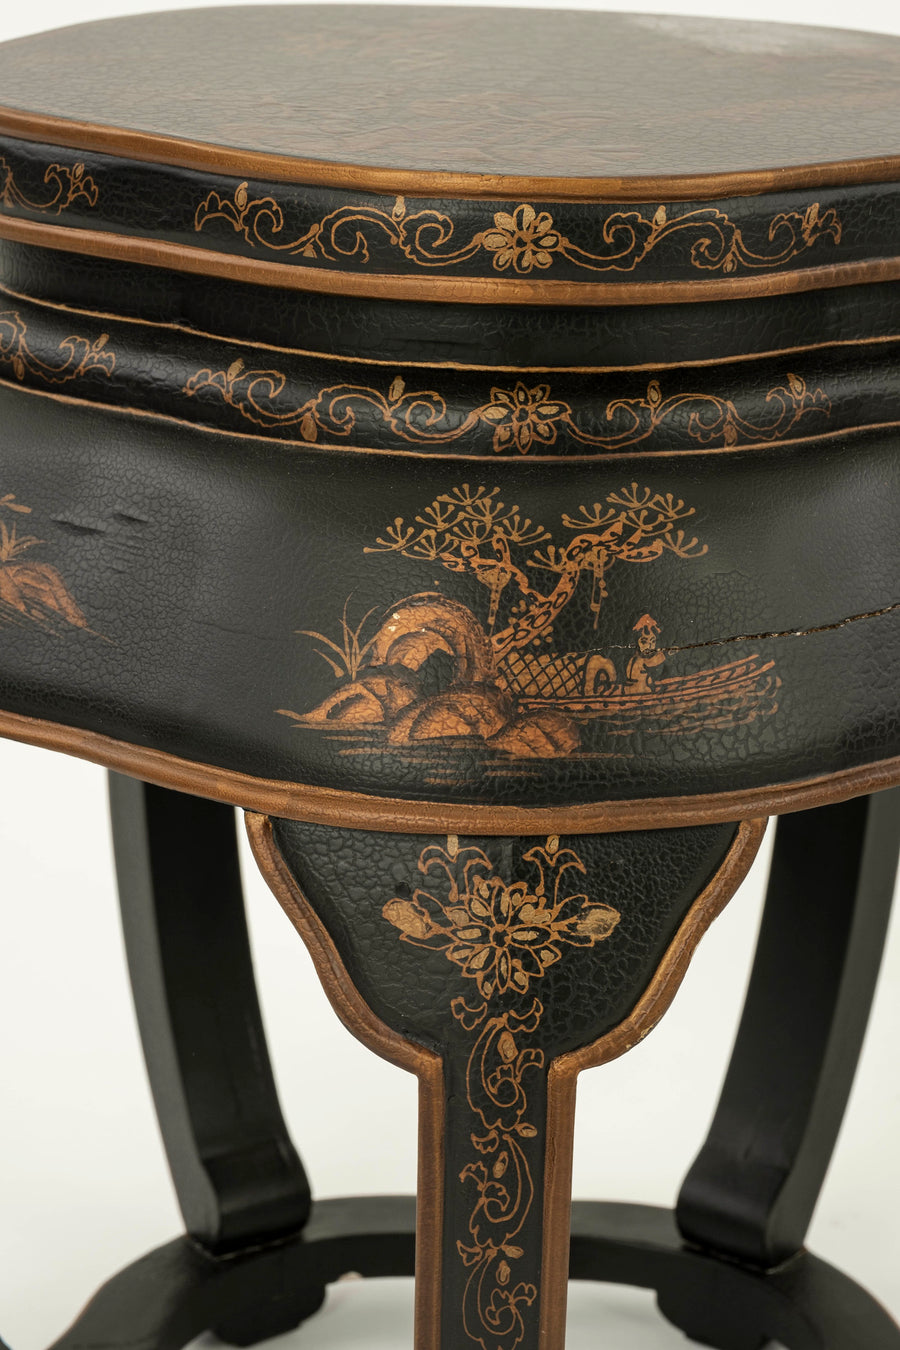 Chinese Ming Dynasty Style Drum Stool or Table